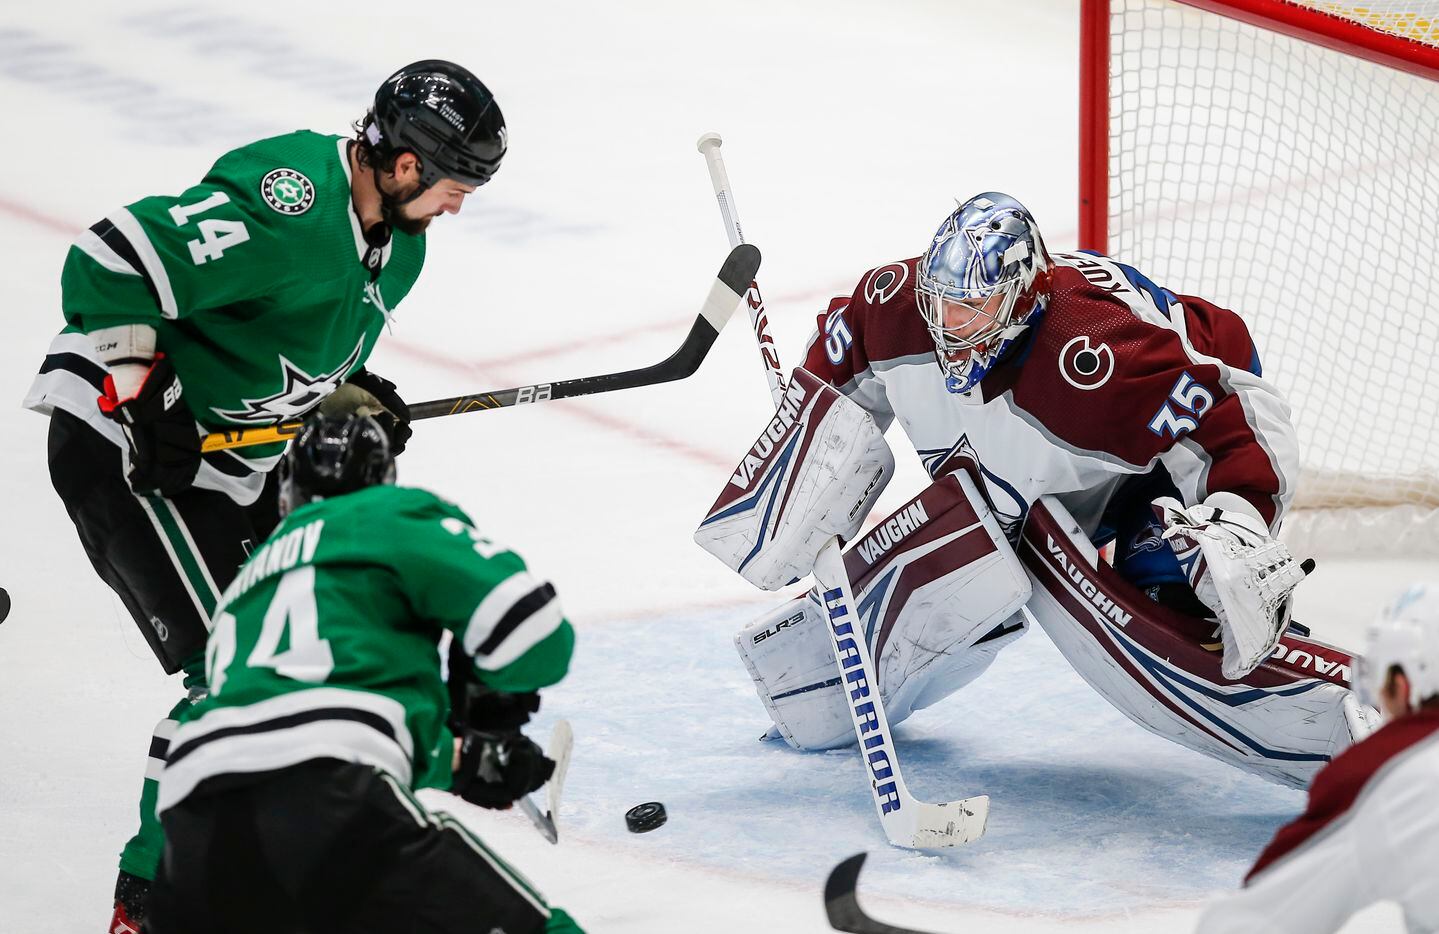 Dallas Stars forward Jamie Benn (14) looks on as forward Denis Gurianov (34) shoots the puck past Colorado Avalanche goaltender Darcy Kuemper (35) for a goal during the second period of an NHL hockey game in Dallas, Friday, November 26, 2021. (Brandon Wade/Special Contributor)